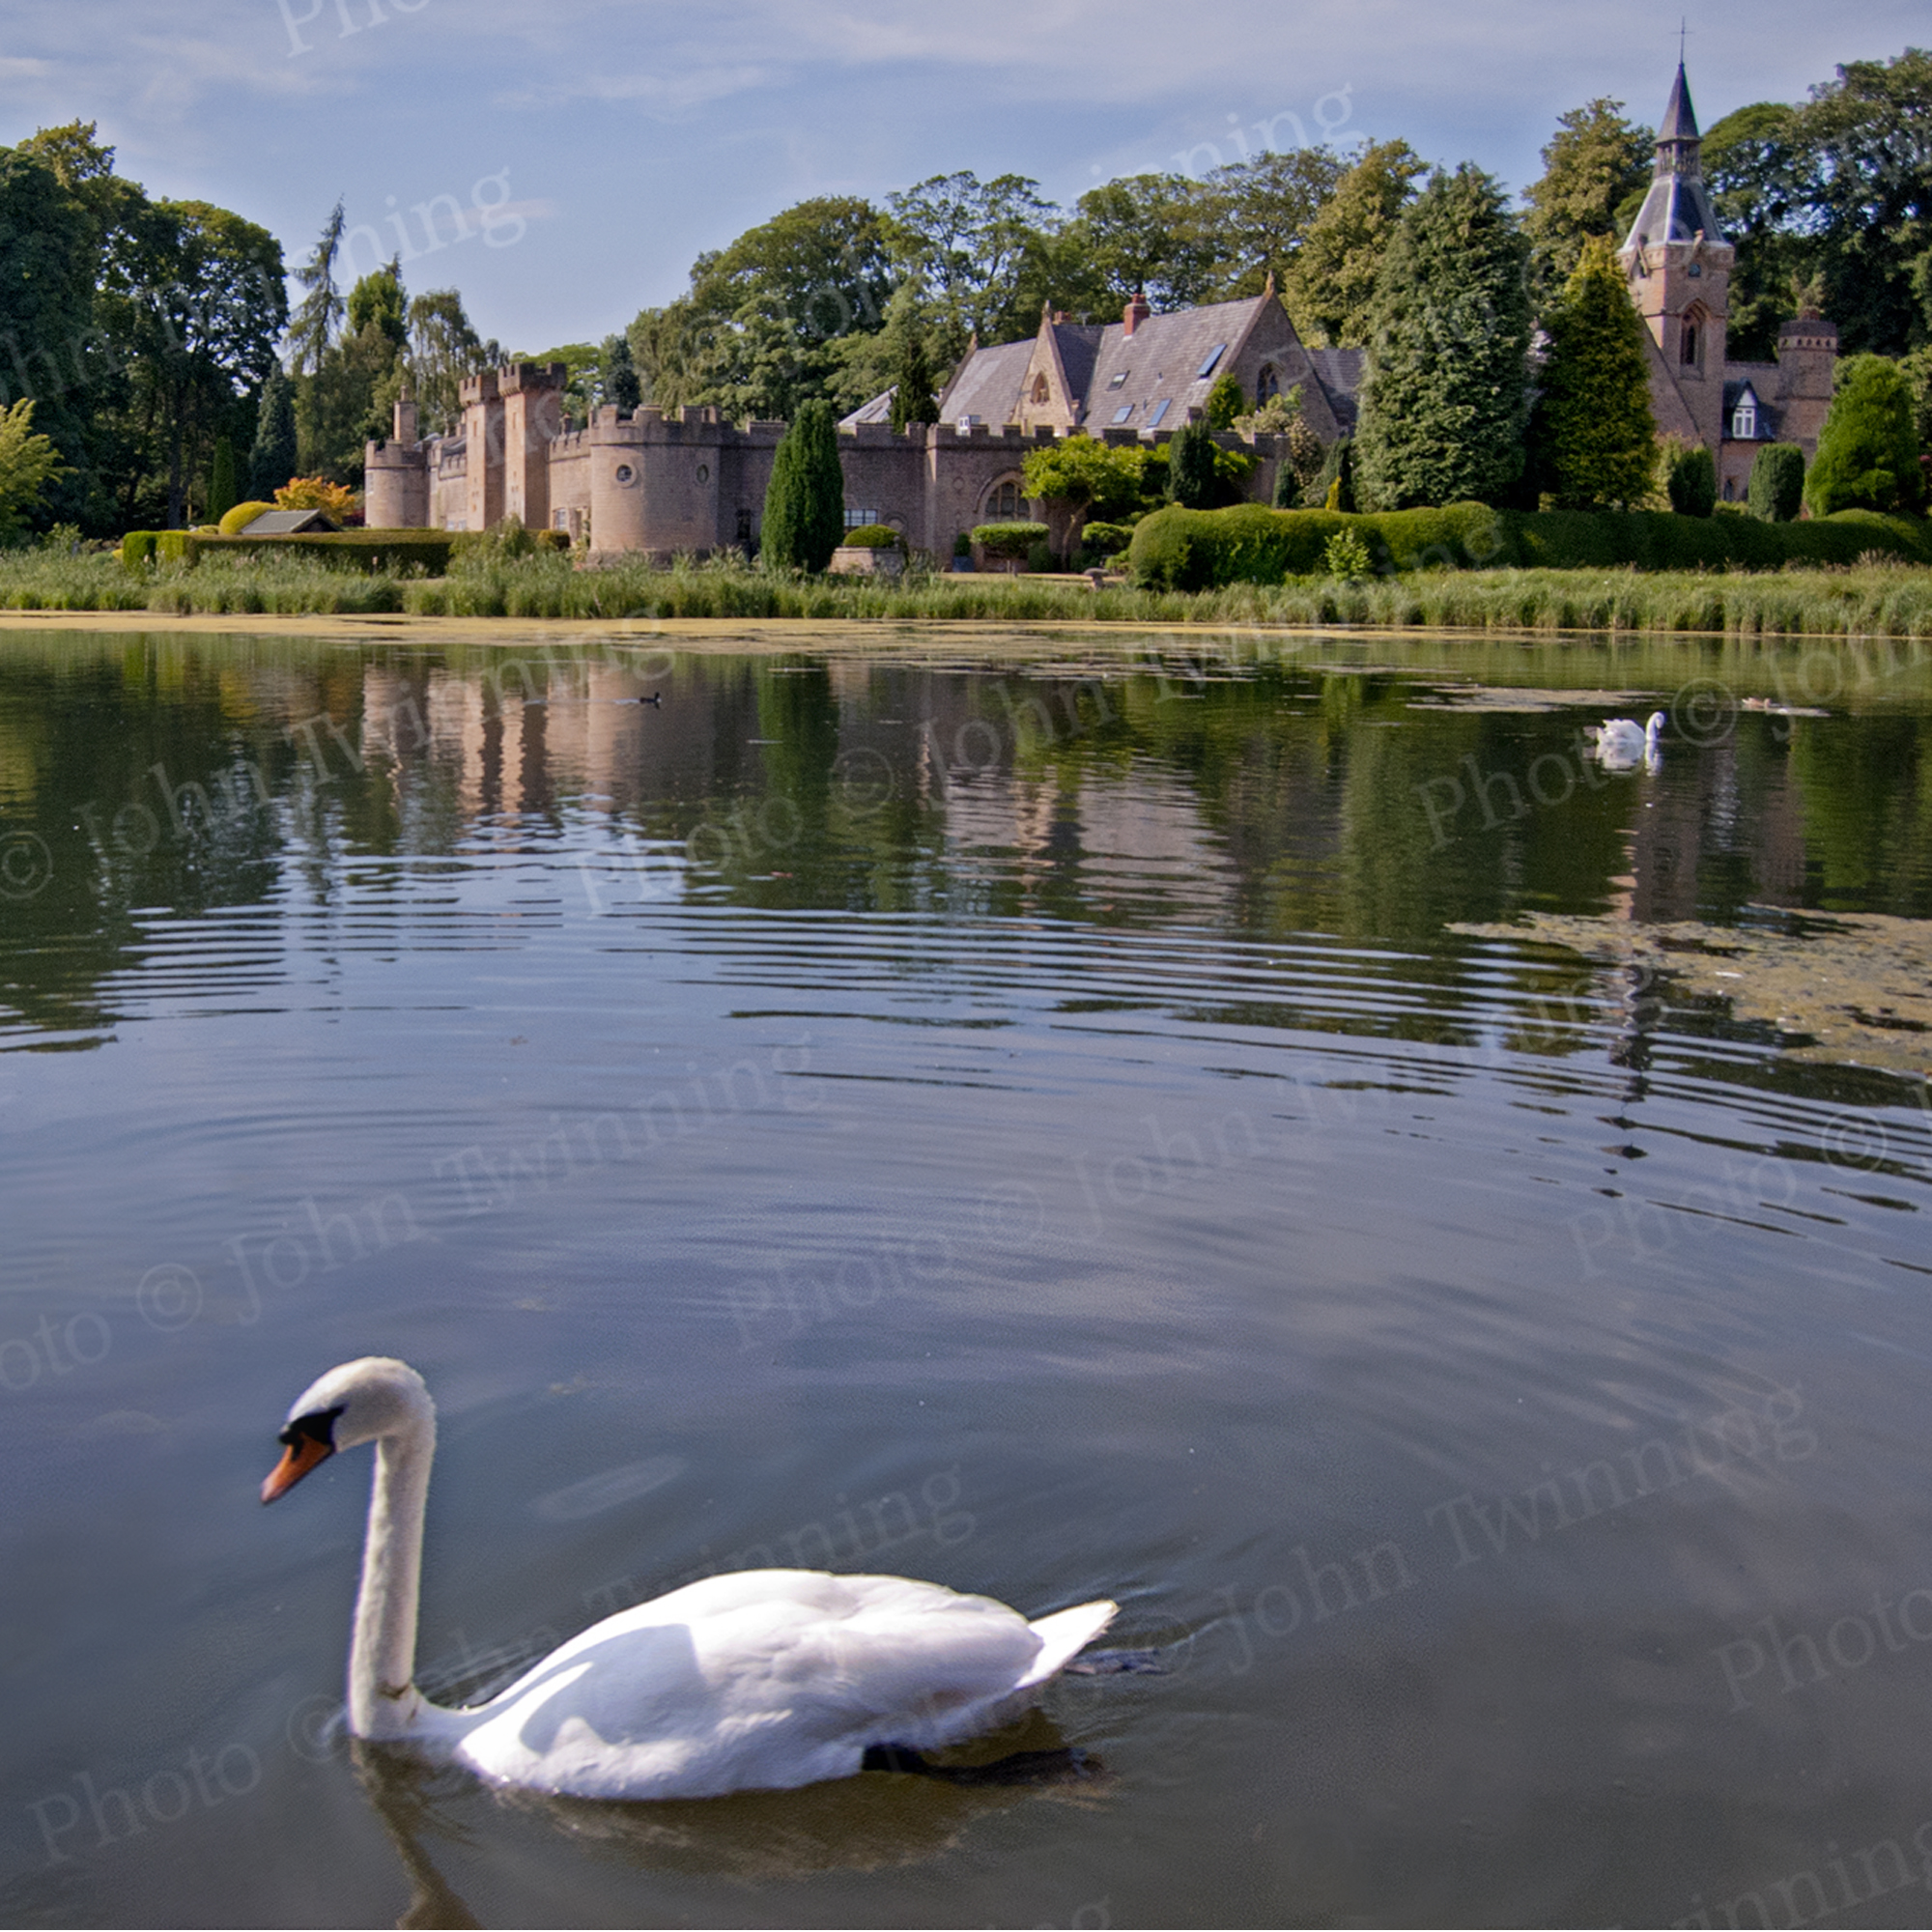 'Swan Lake' [square] - art print from a photo of a swan on still water in front of a castle